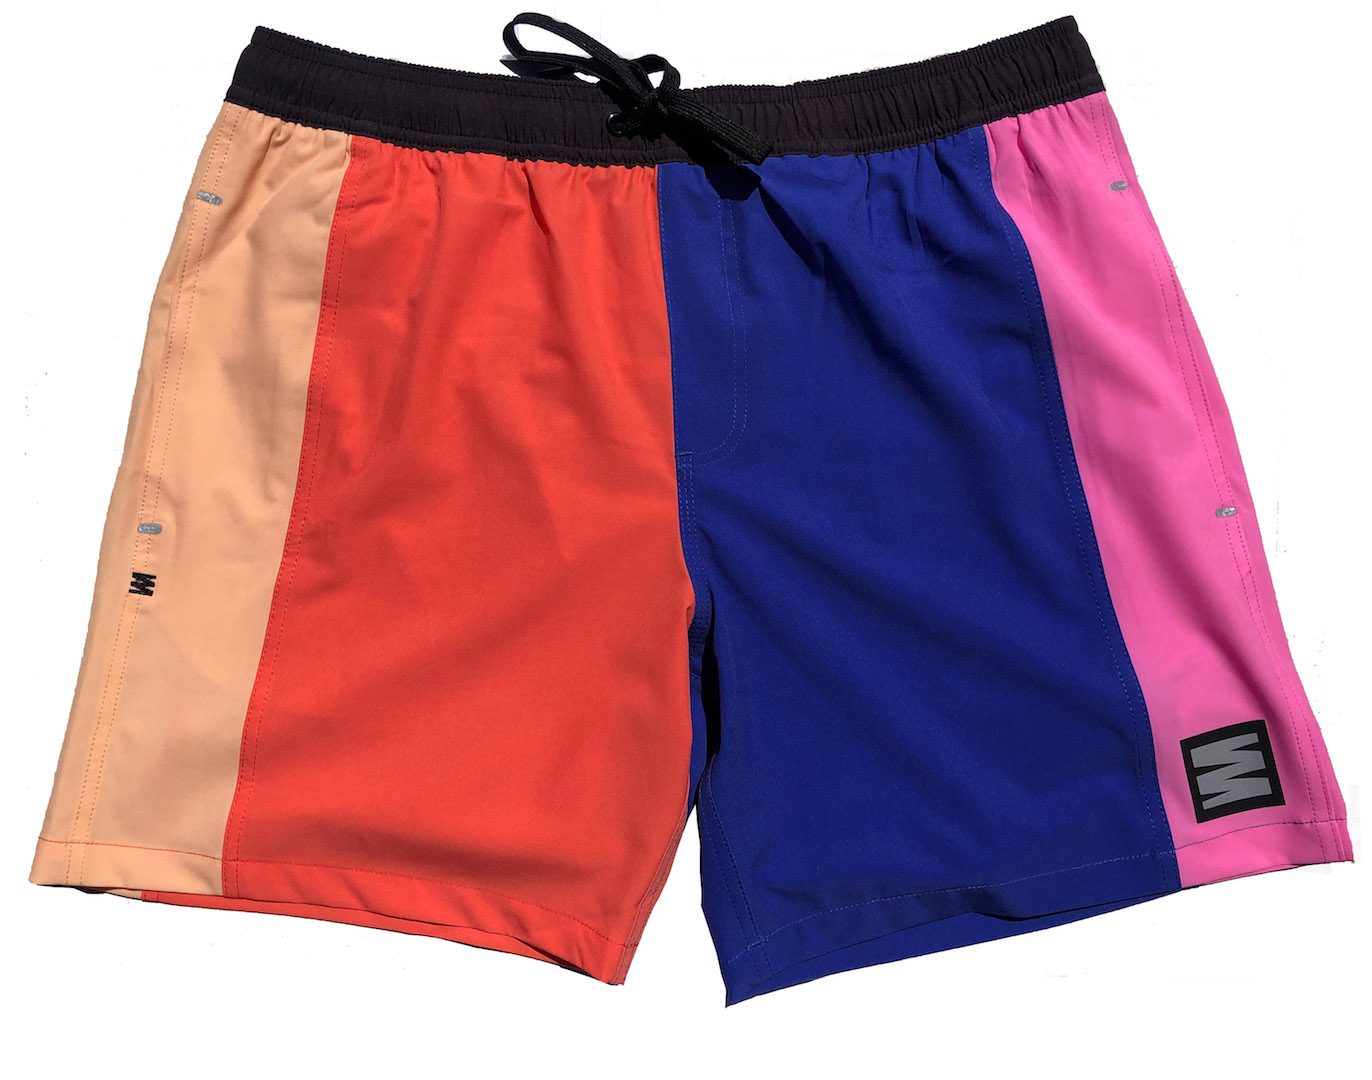 Short Series Co. SS20 Boardshorts Preview